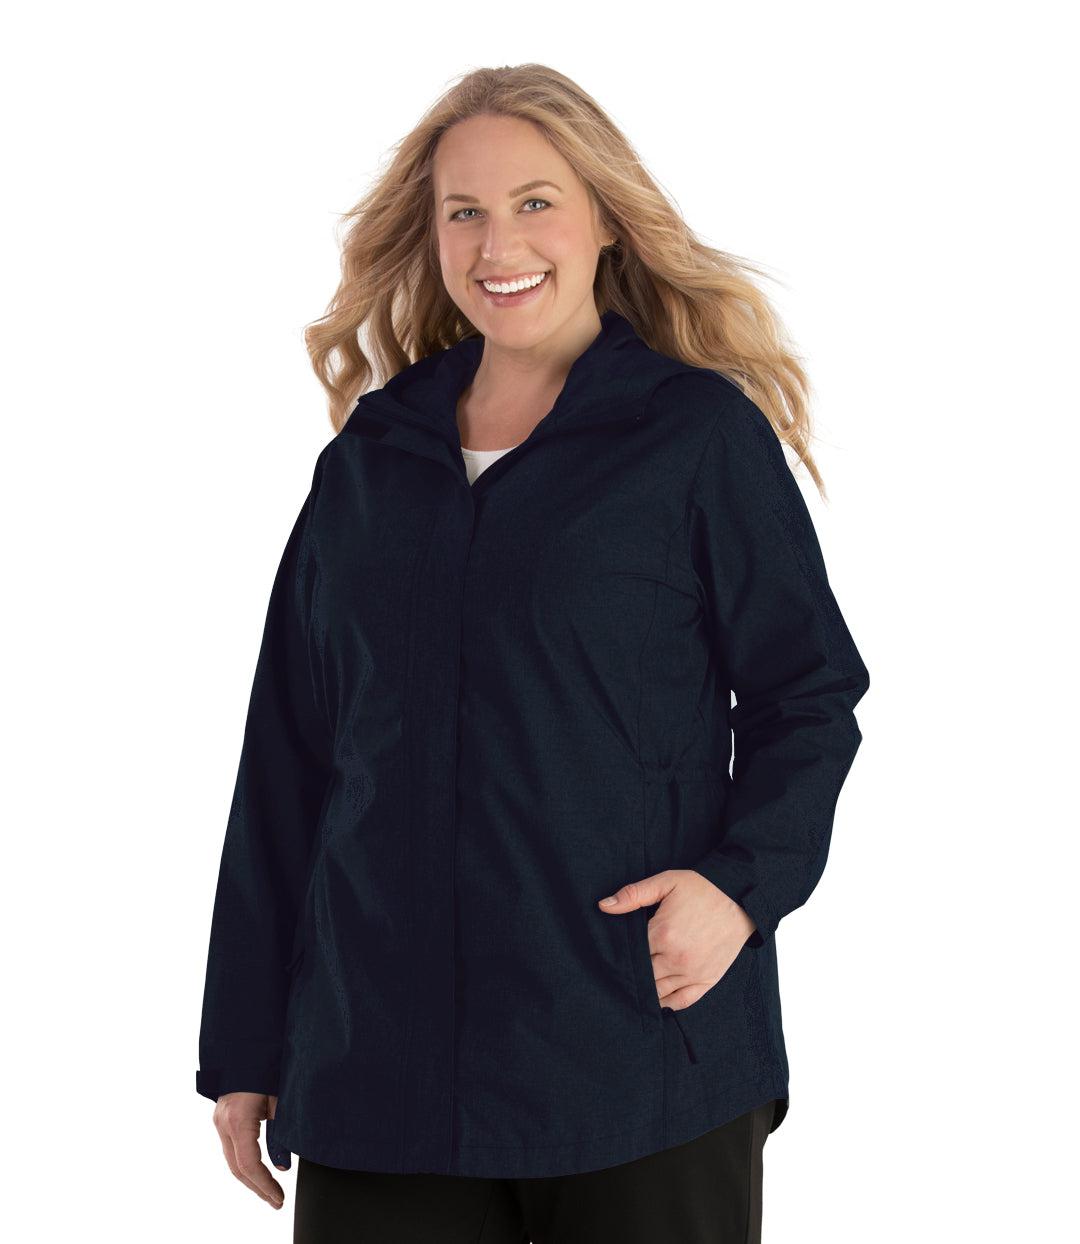 Plus size woman, front view, wearing a JunoActive plus size Waterproof Breathable Wind & Rain Jacket in deep navy. The jacket has a hood, double front closure and side pockets. The length of the plus size jacket hits just below the hips.